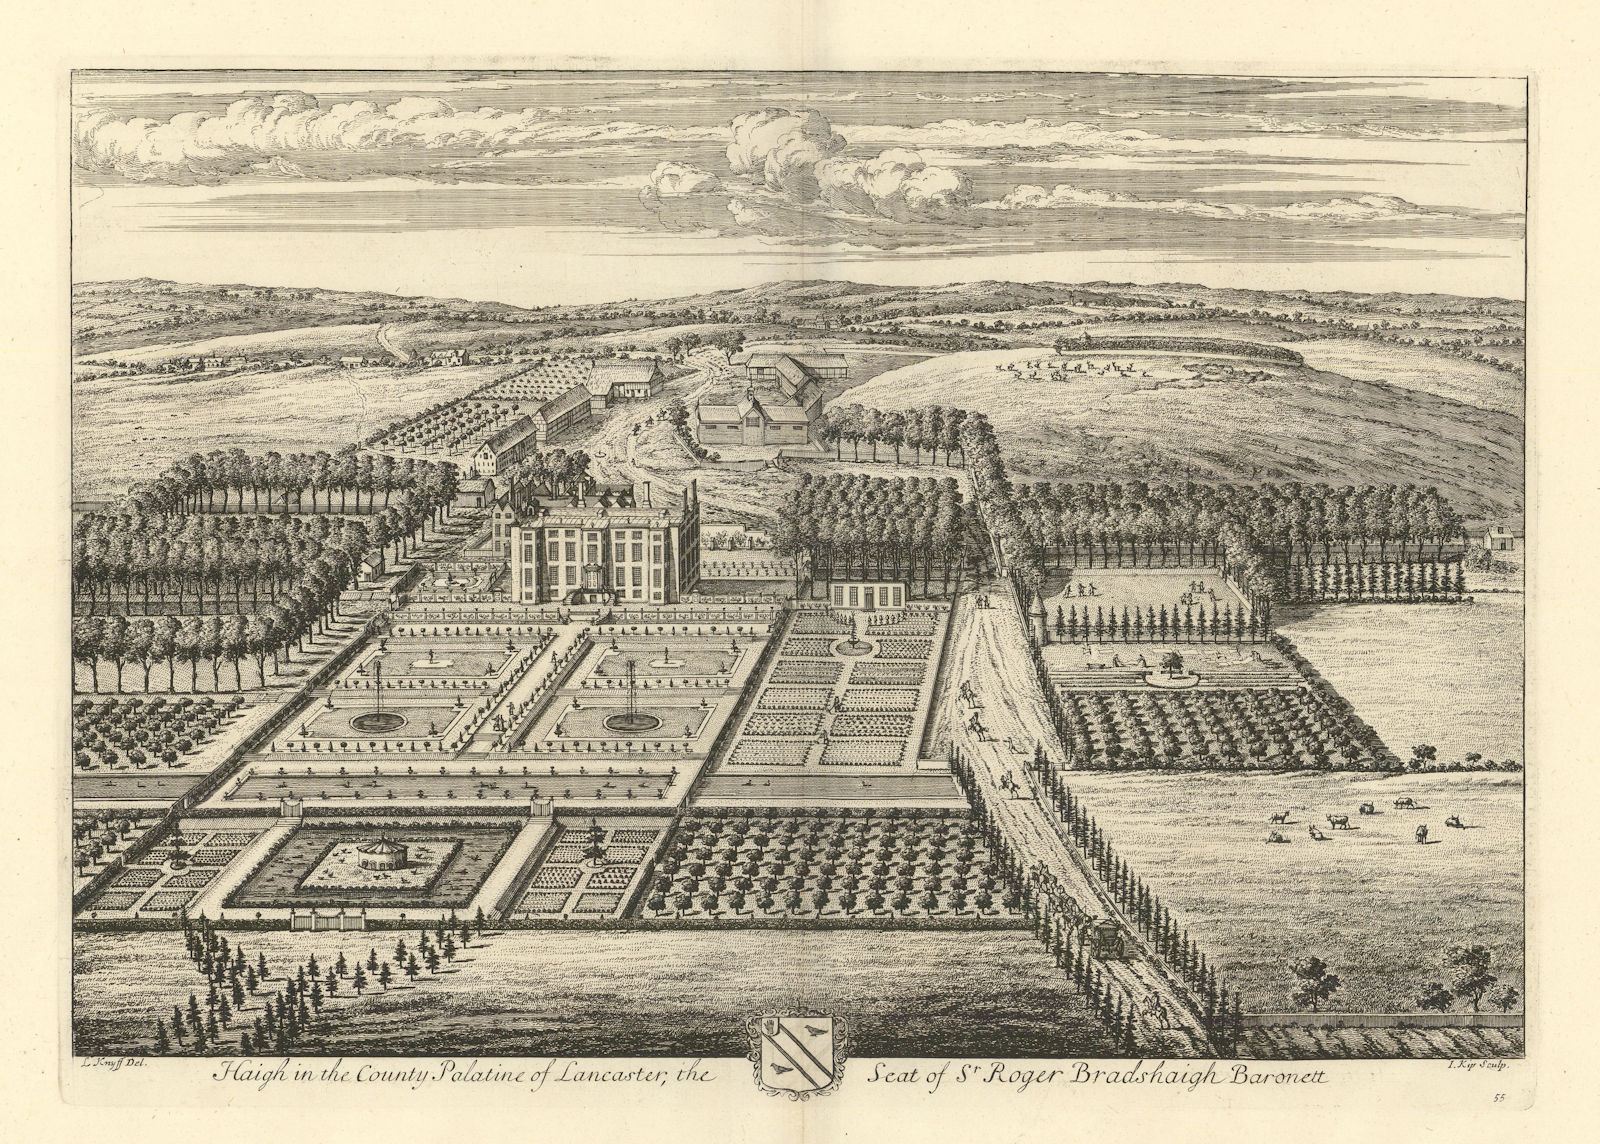 Haigh Hall, Wigan by Kip/Knyff. "Haigh in the County Palatine of Lancaster" 1709